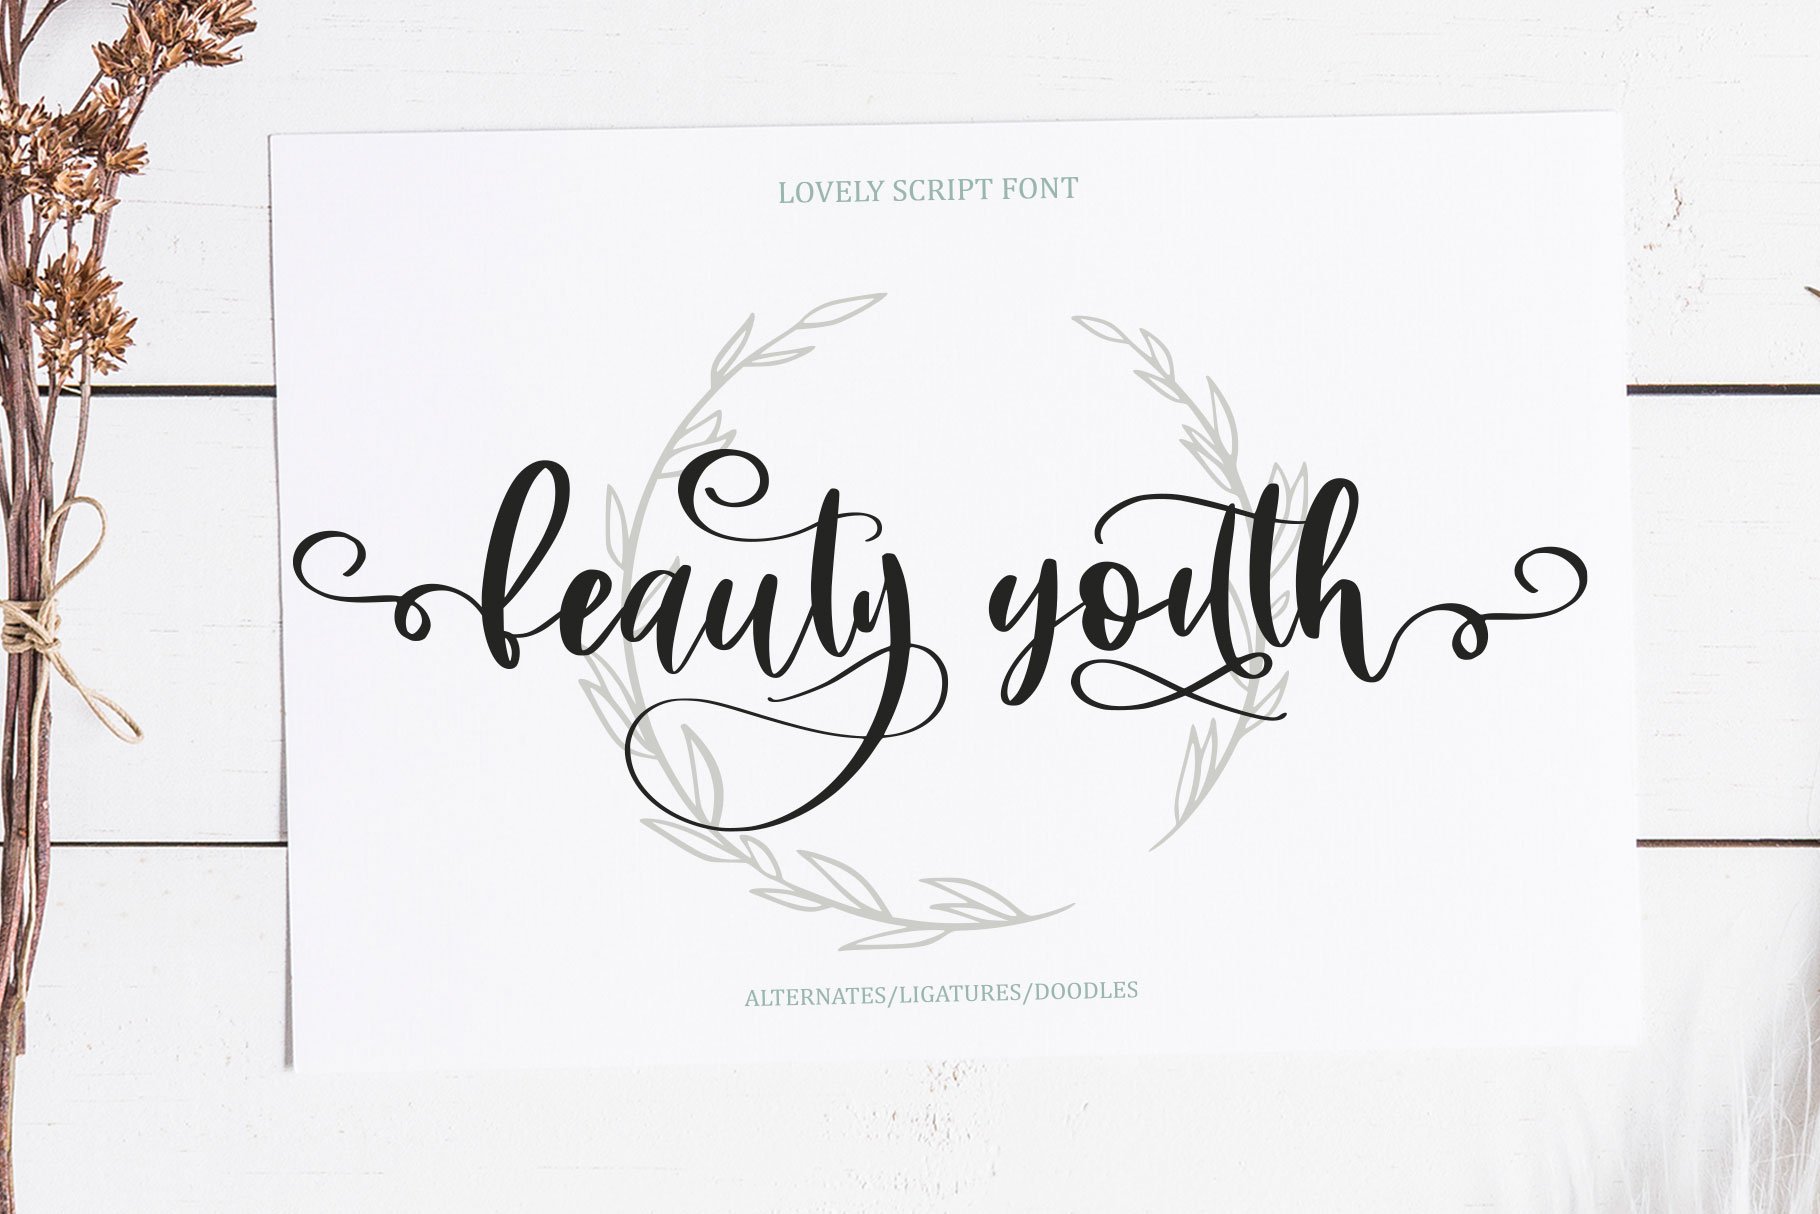 Beauty Youth. Lovely Script cover image.